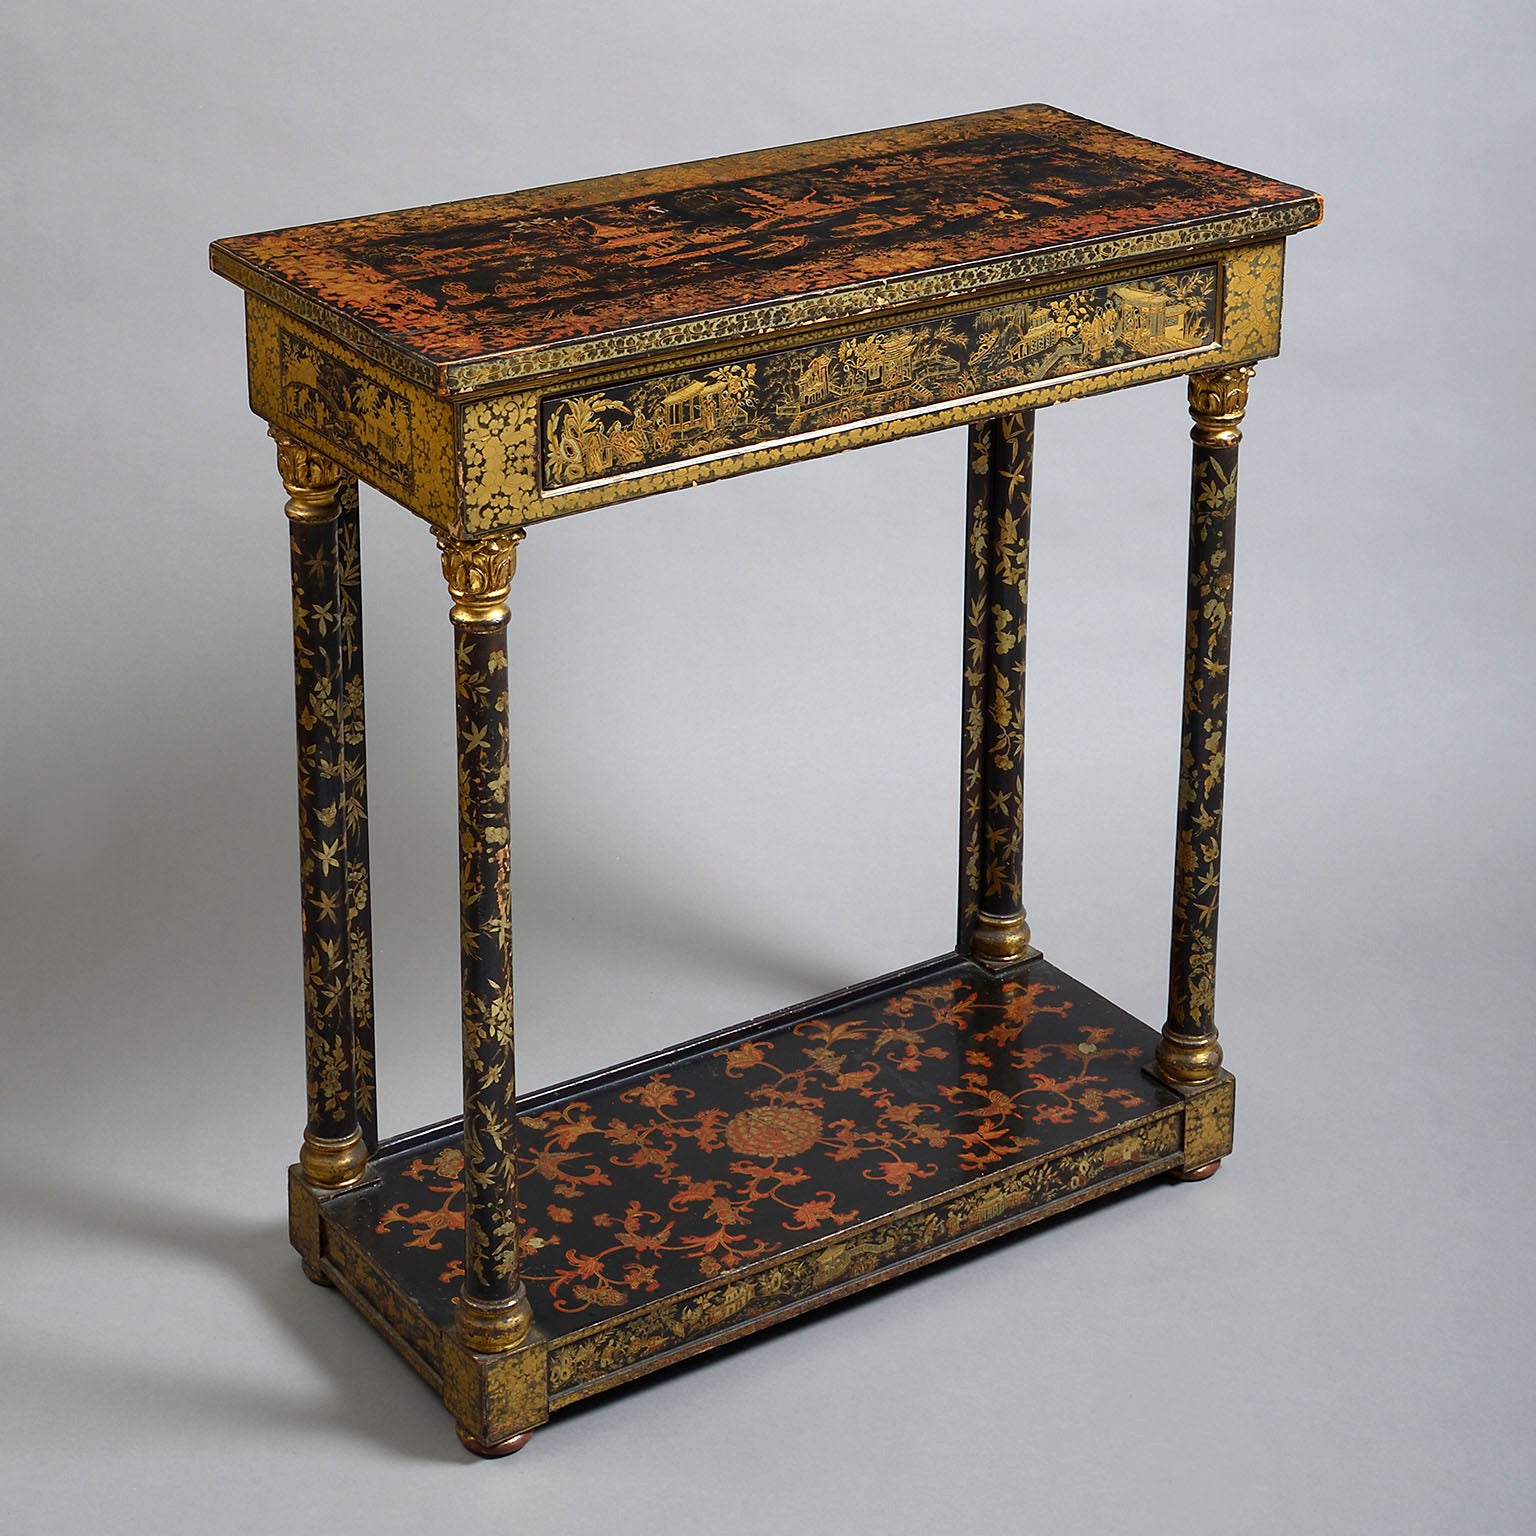 A Chinese Export Lacquer Console Table